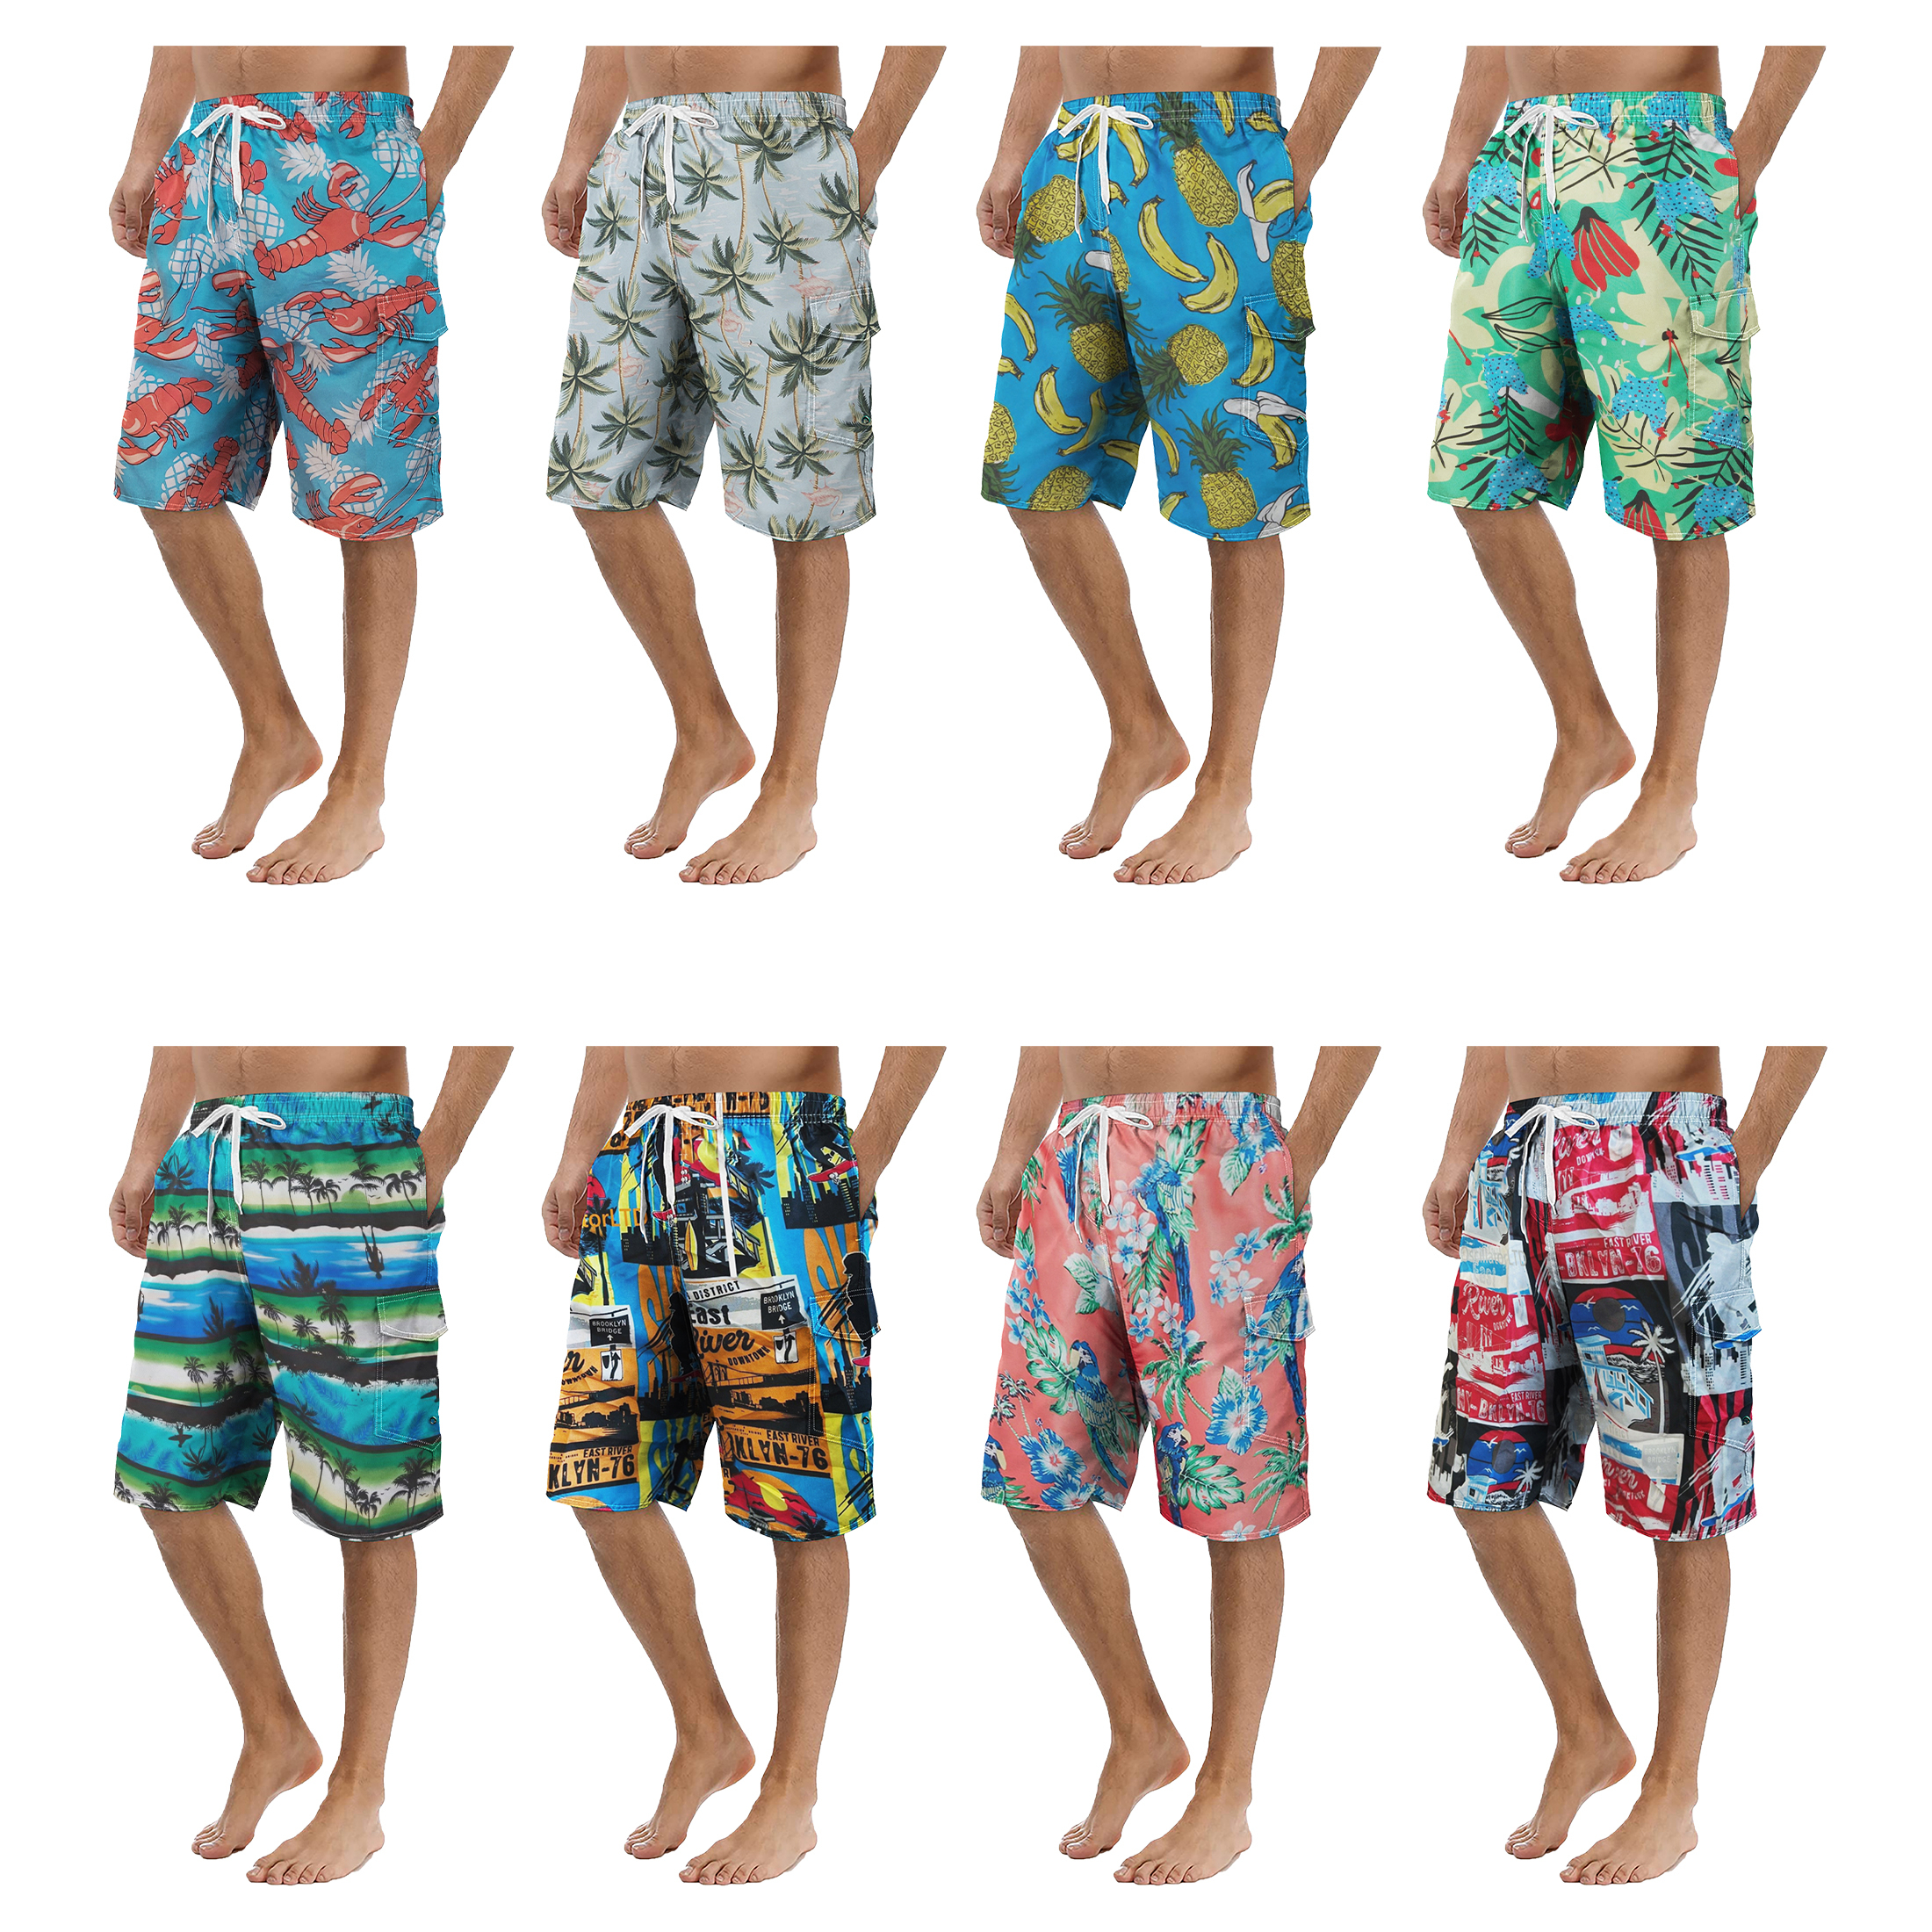 2-Pack Men's Quick Dry Printed Cargo Swim Shorts With Pockets Regular Flex Bathing Board Suits & Trunks - XL